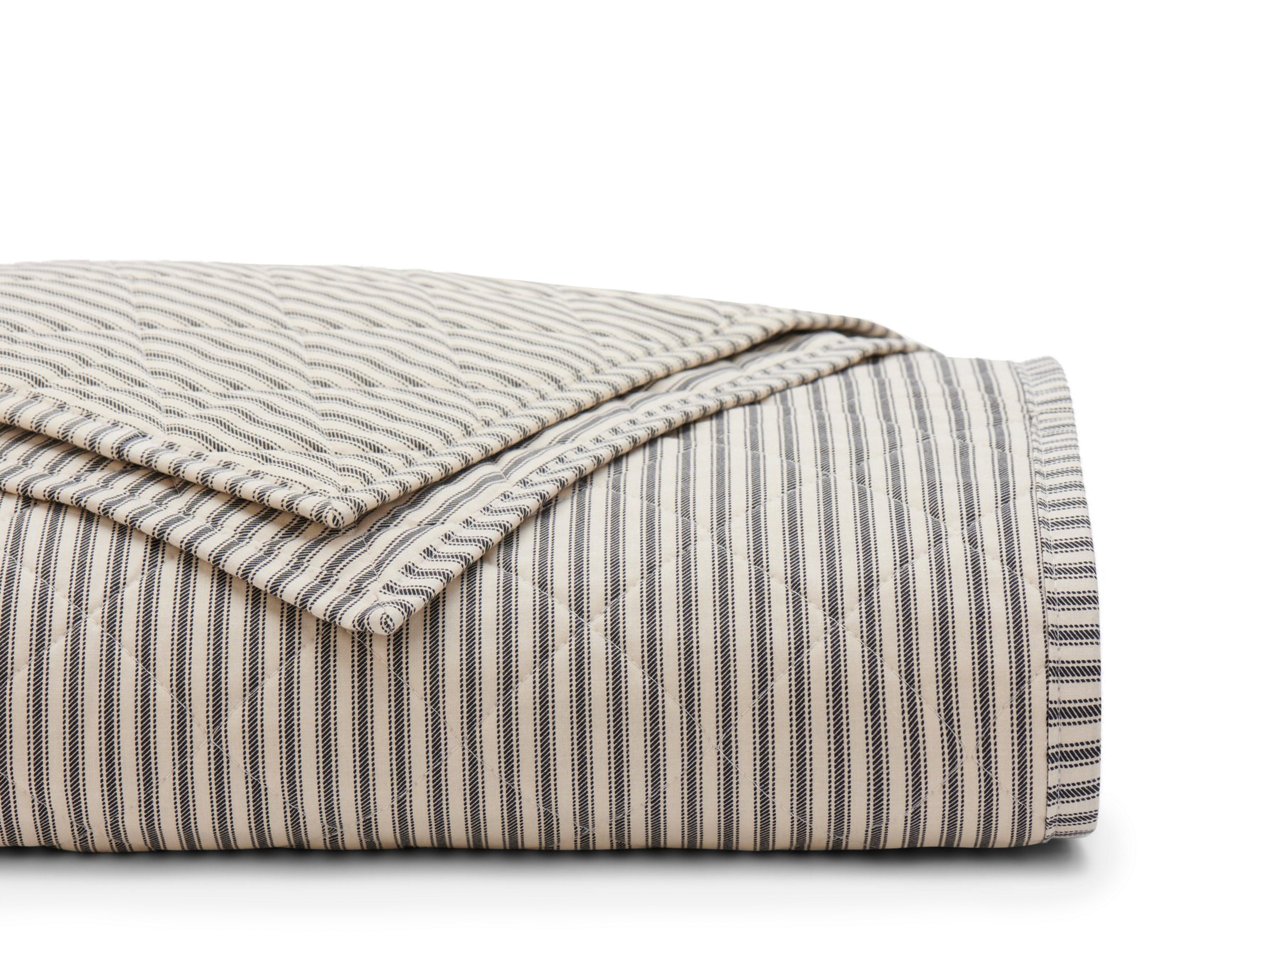 Red Land Cotton's Ticking Stripe Classic Quilt